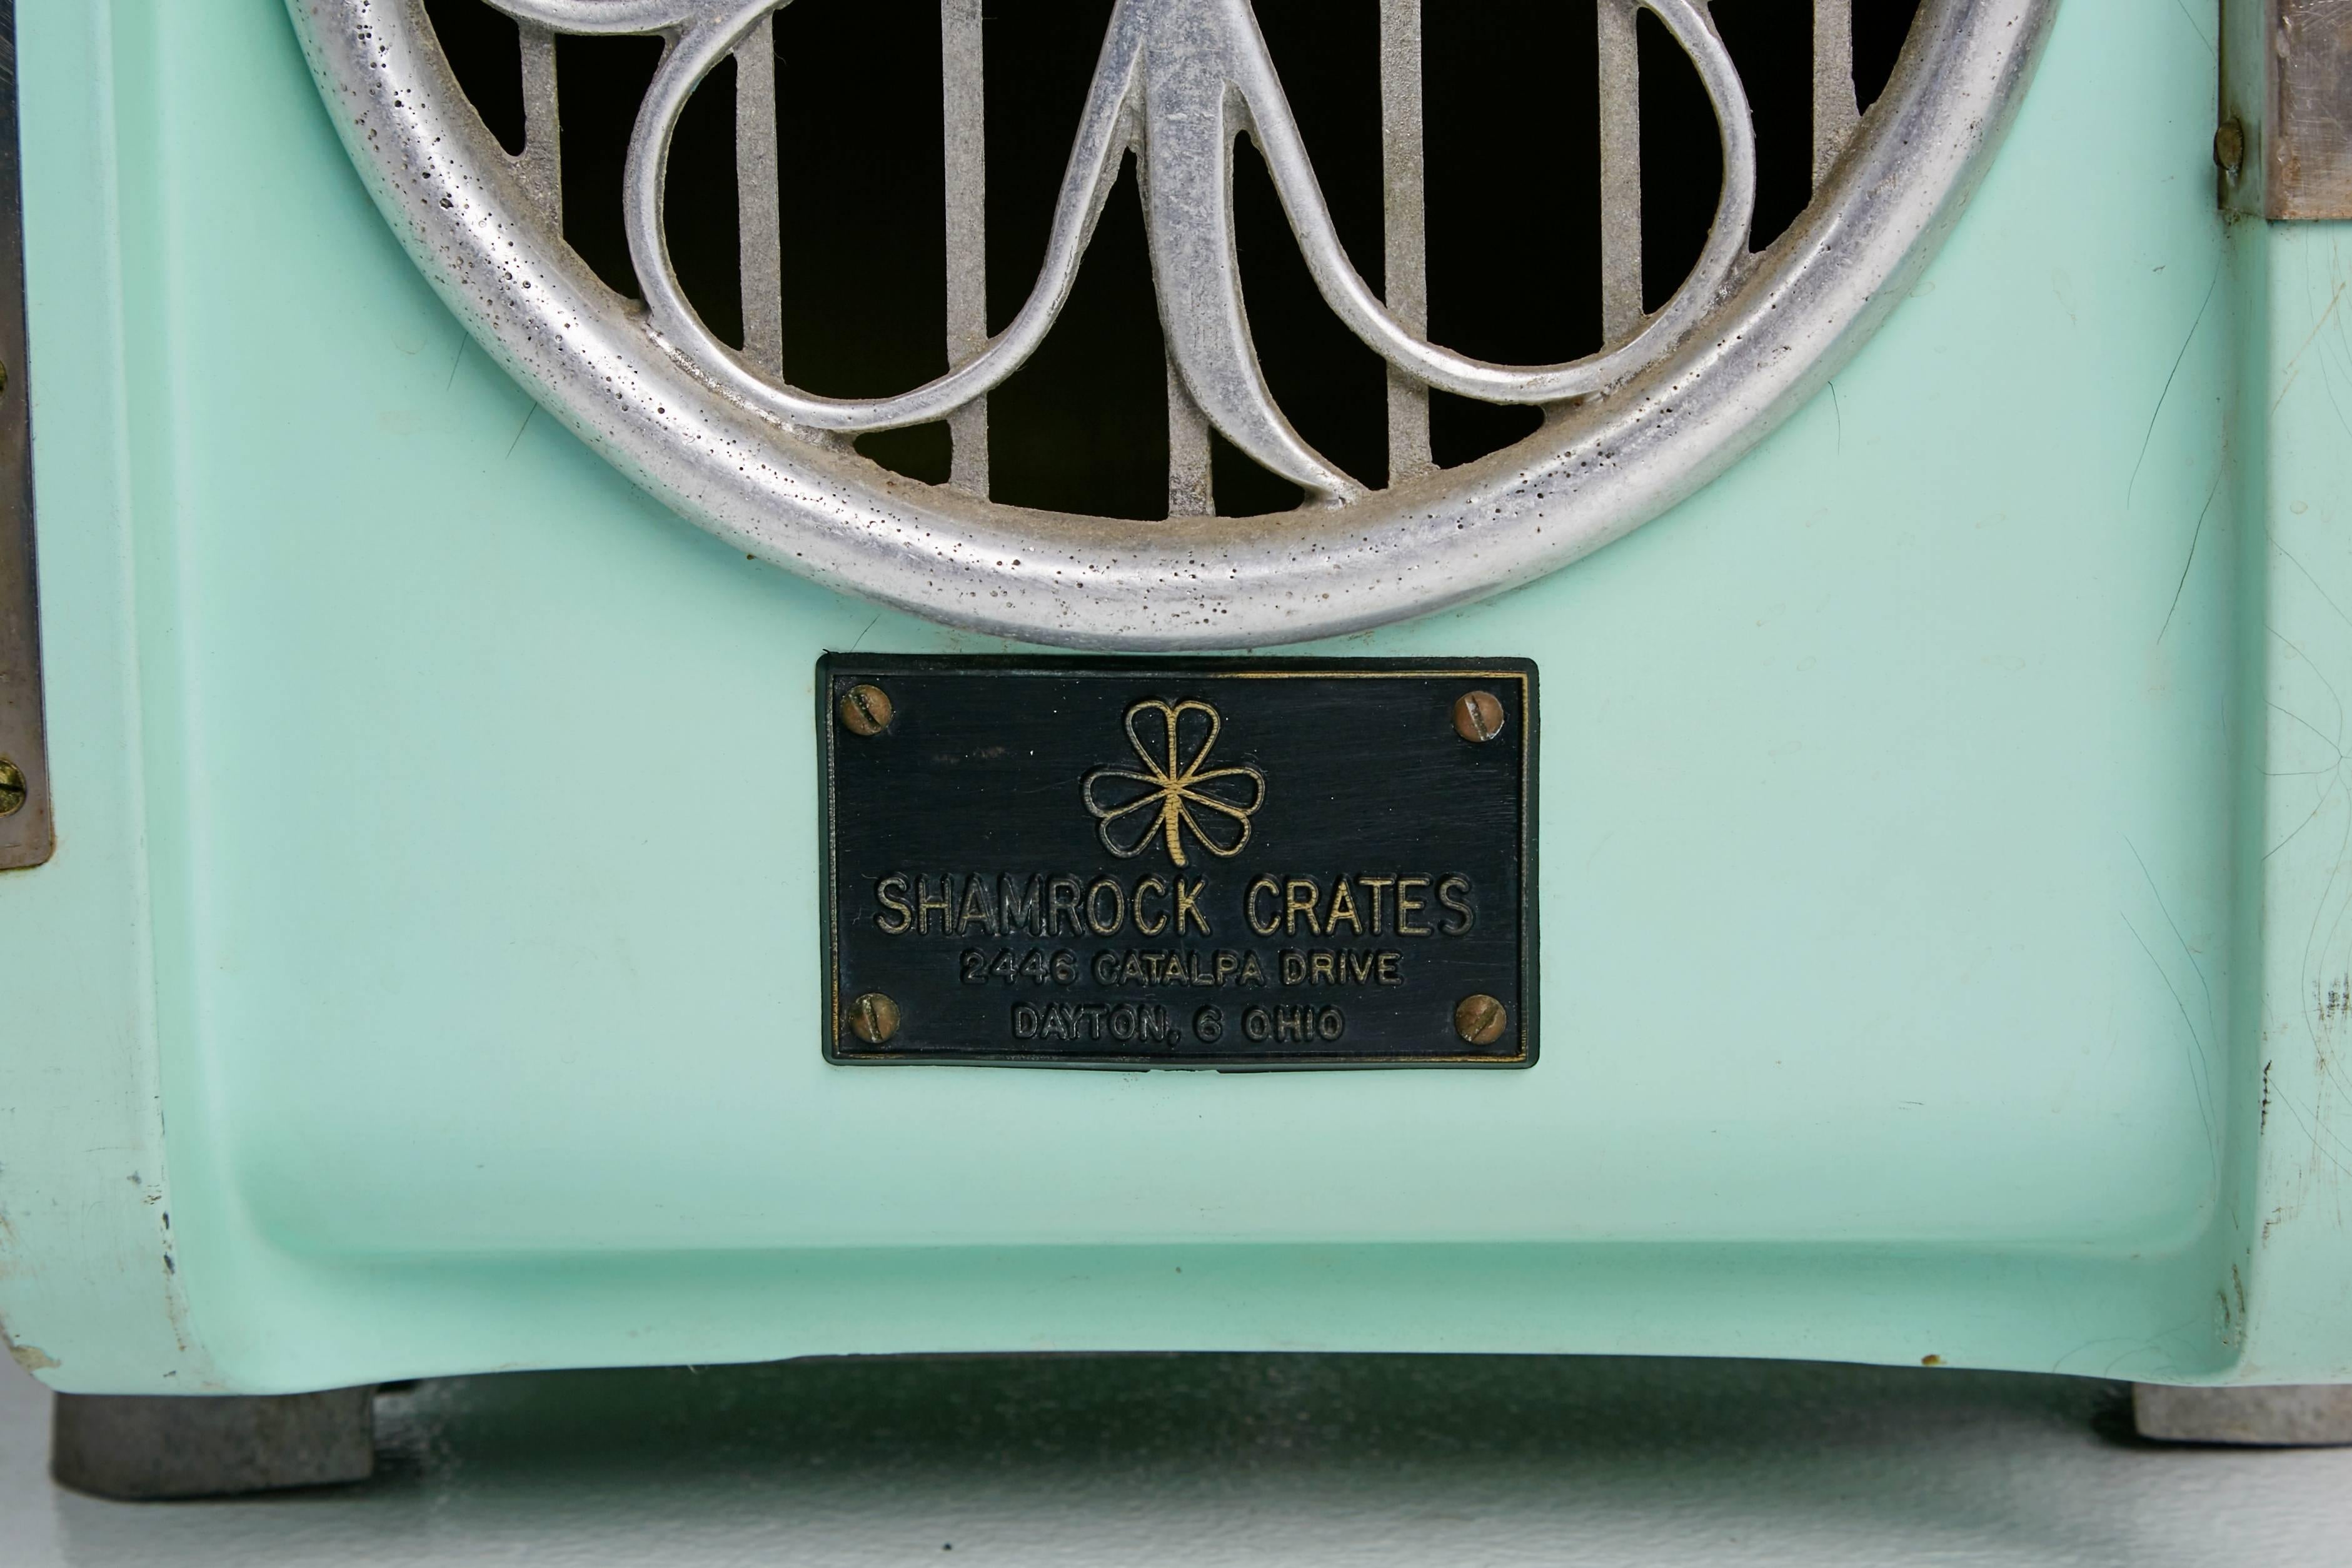 American  Shamrock Crates Pet Carrier in Mint Green, circa 1960